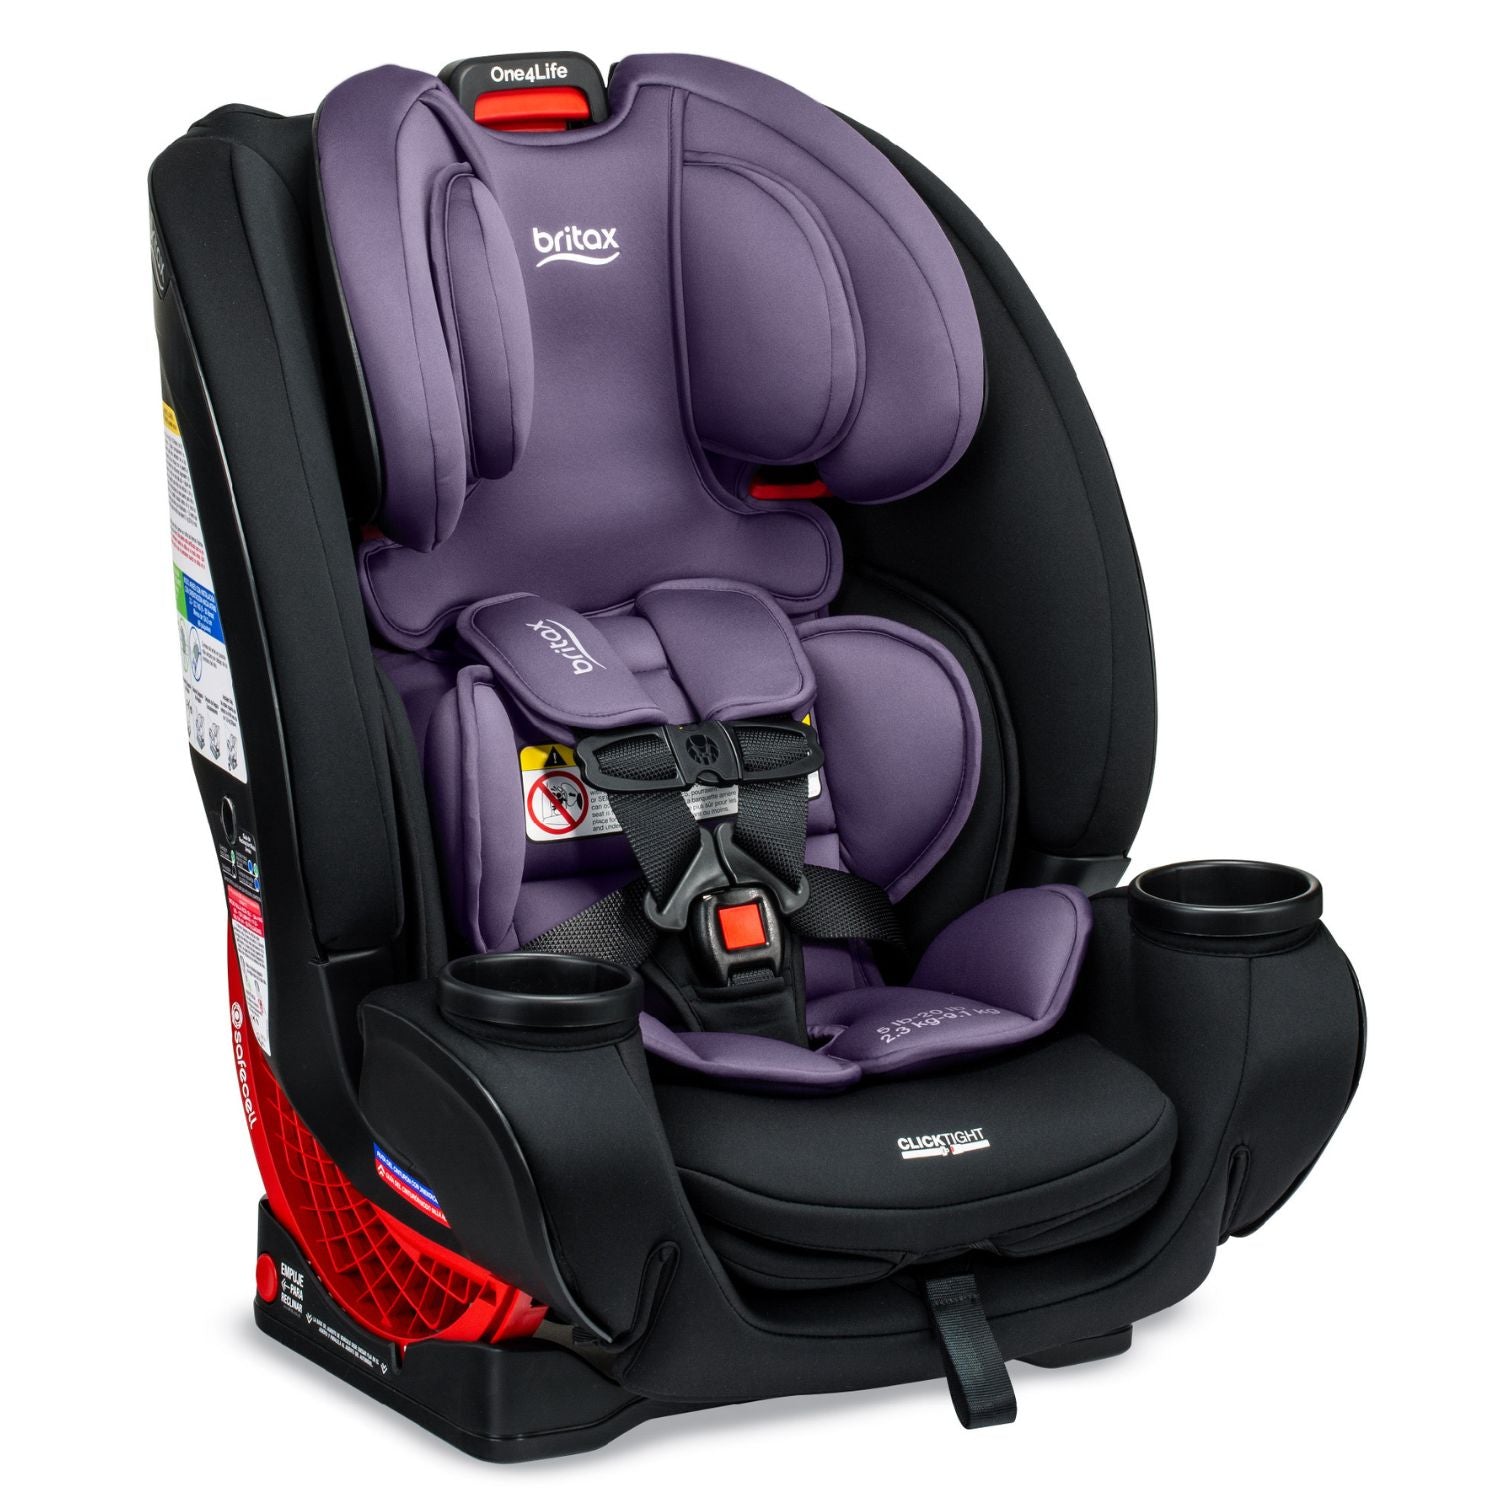 Britax One4Life ClickTight All-In-One Car Seat - Iris Onyx